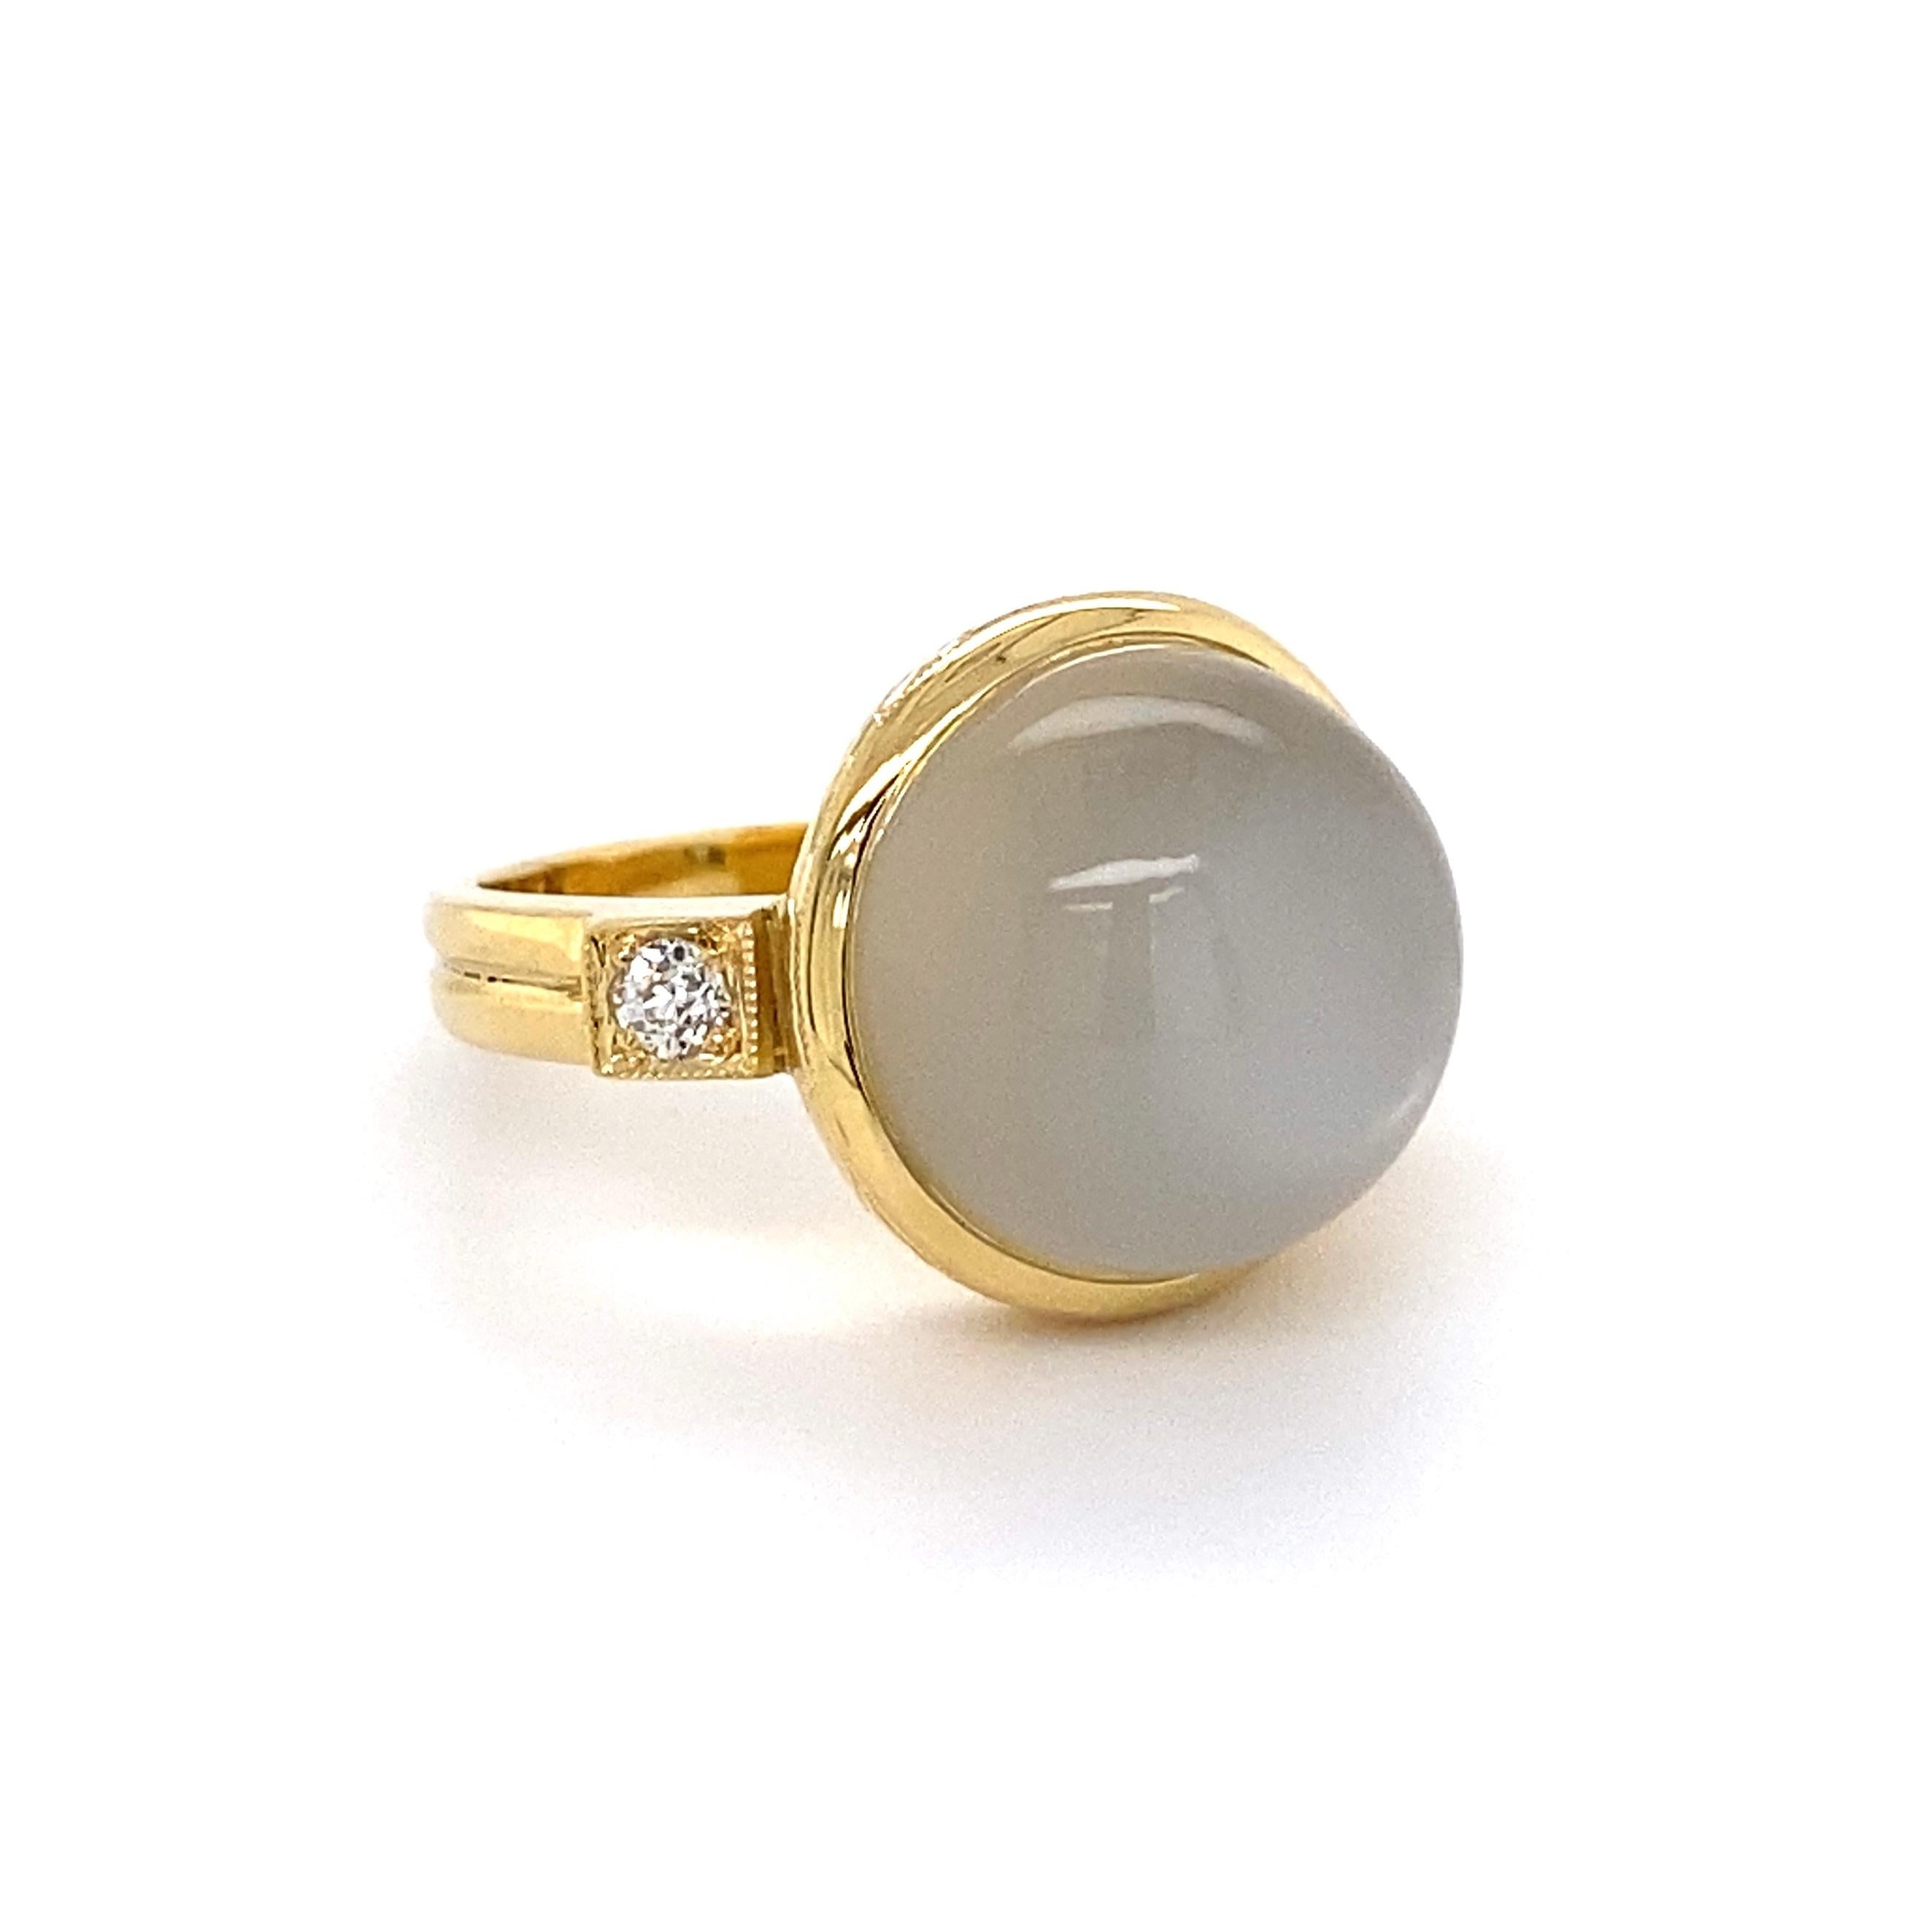 Simply Beautiful! Finely detailed Large Moonstone and Diamond Cocktail Ring. Centering a securely Hand set Cabochon Moonstone, weighing approx. 9 Carats, accented by Old European-Cut Diamonds, approx. 0.22 total carat weight. Hand crafted 18K Yellow